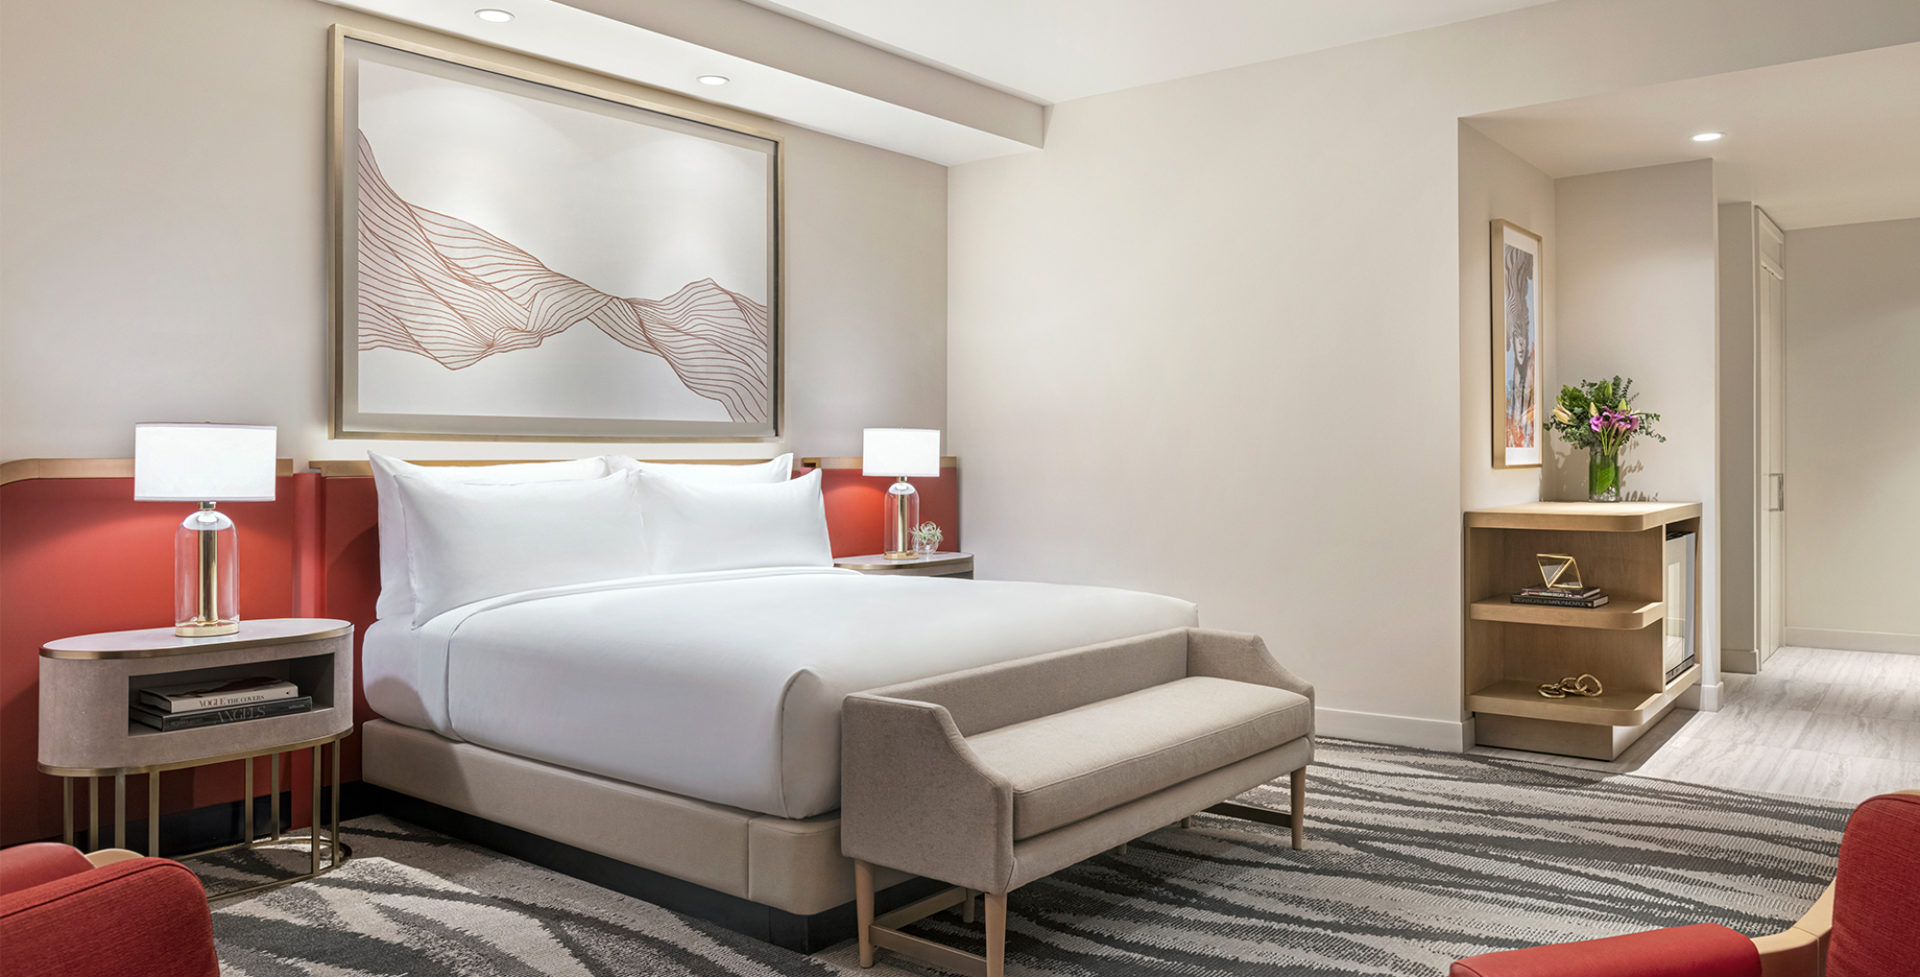 Top 5 Tips for Art in Hotel Guest Rooms